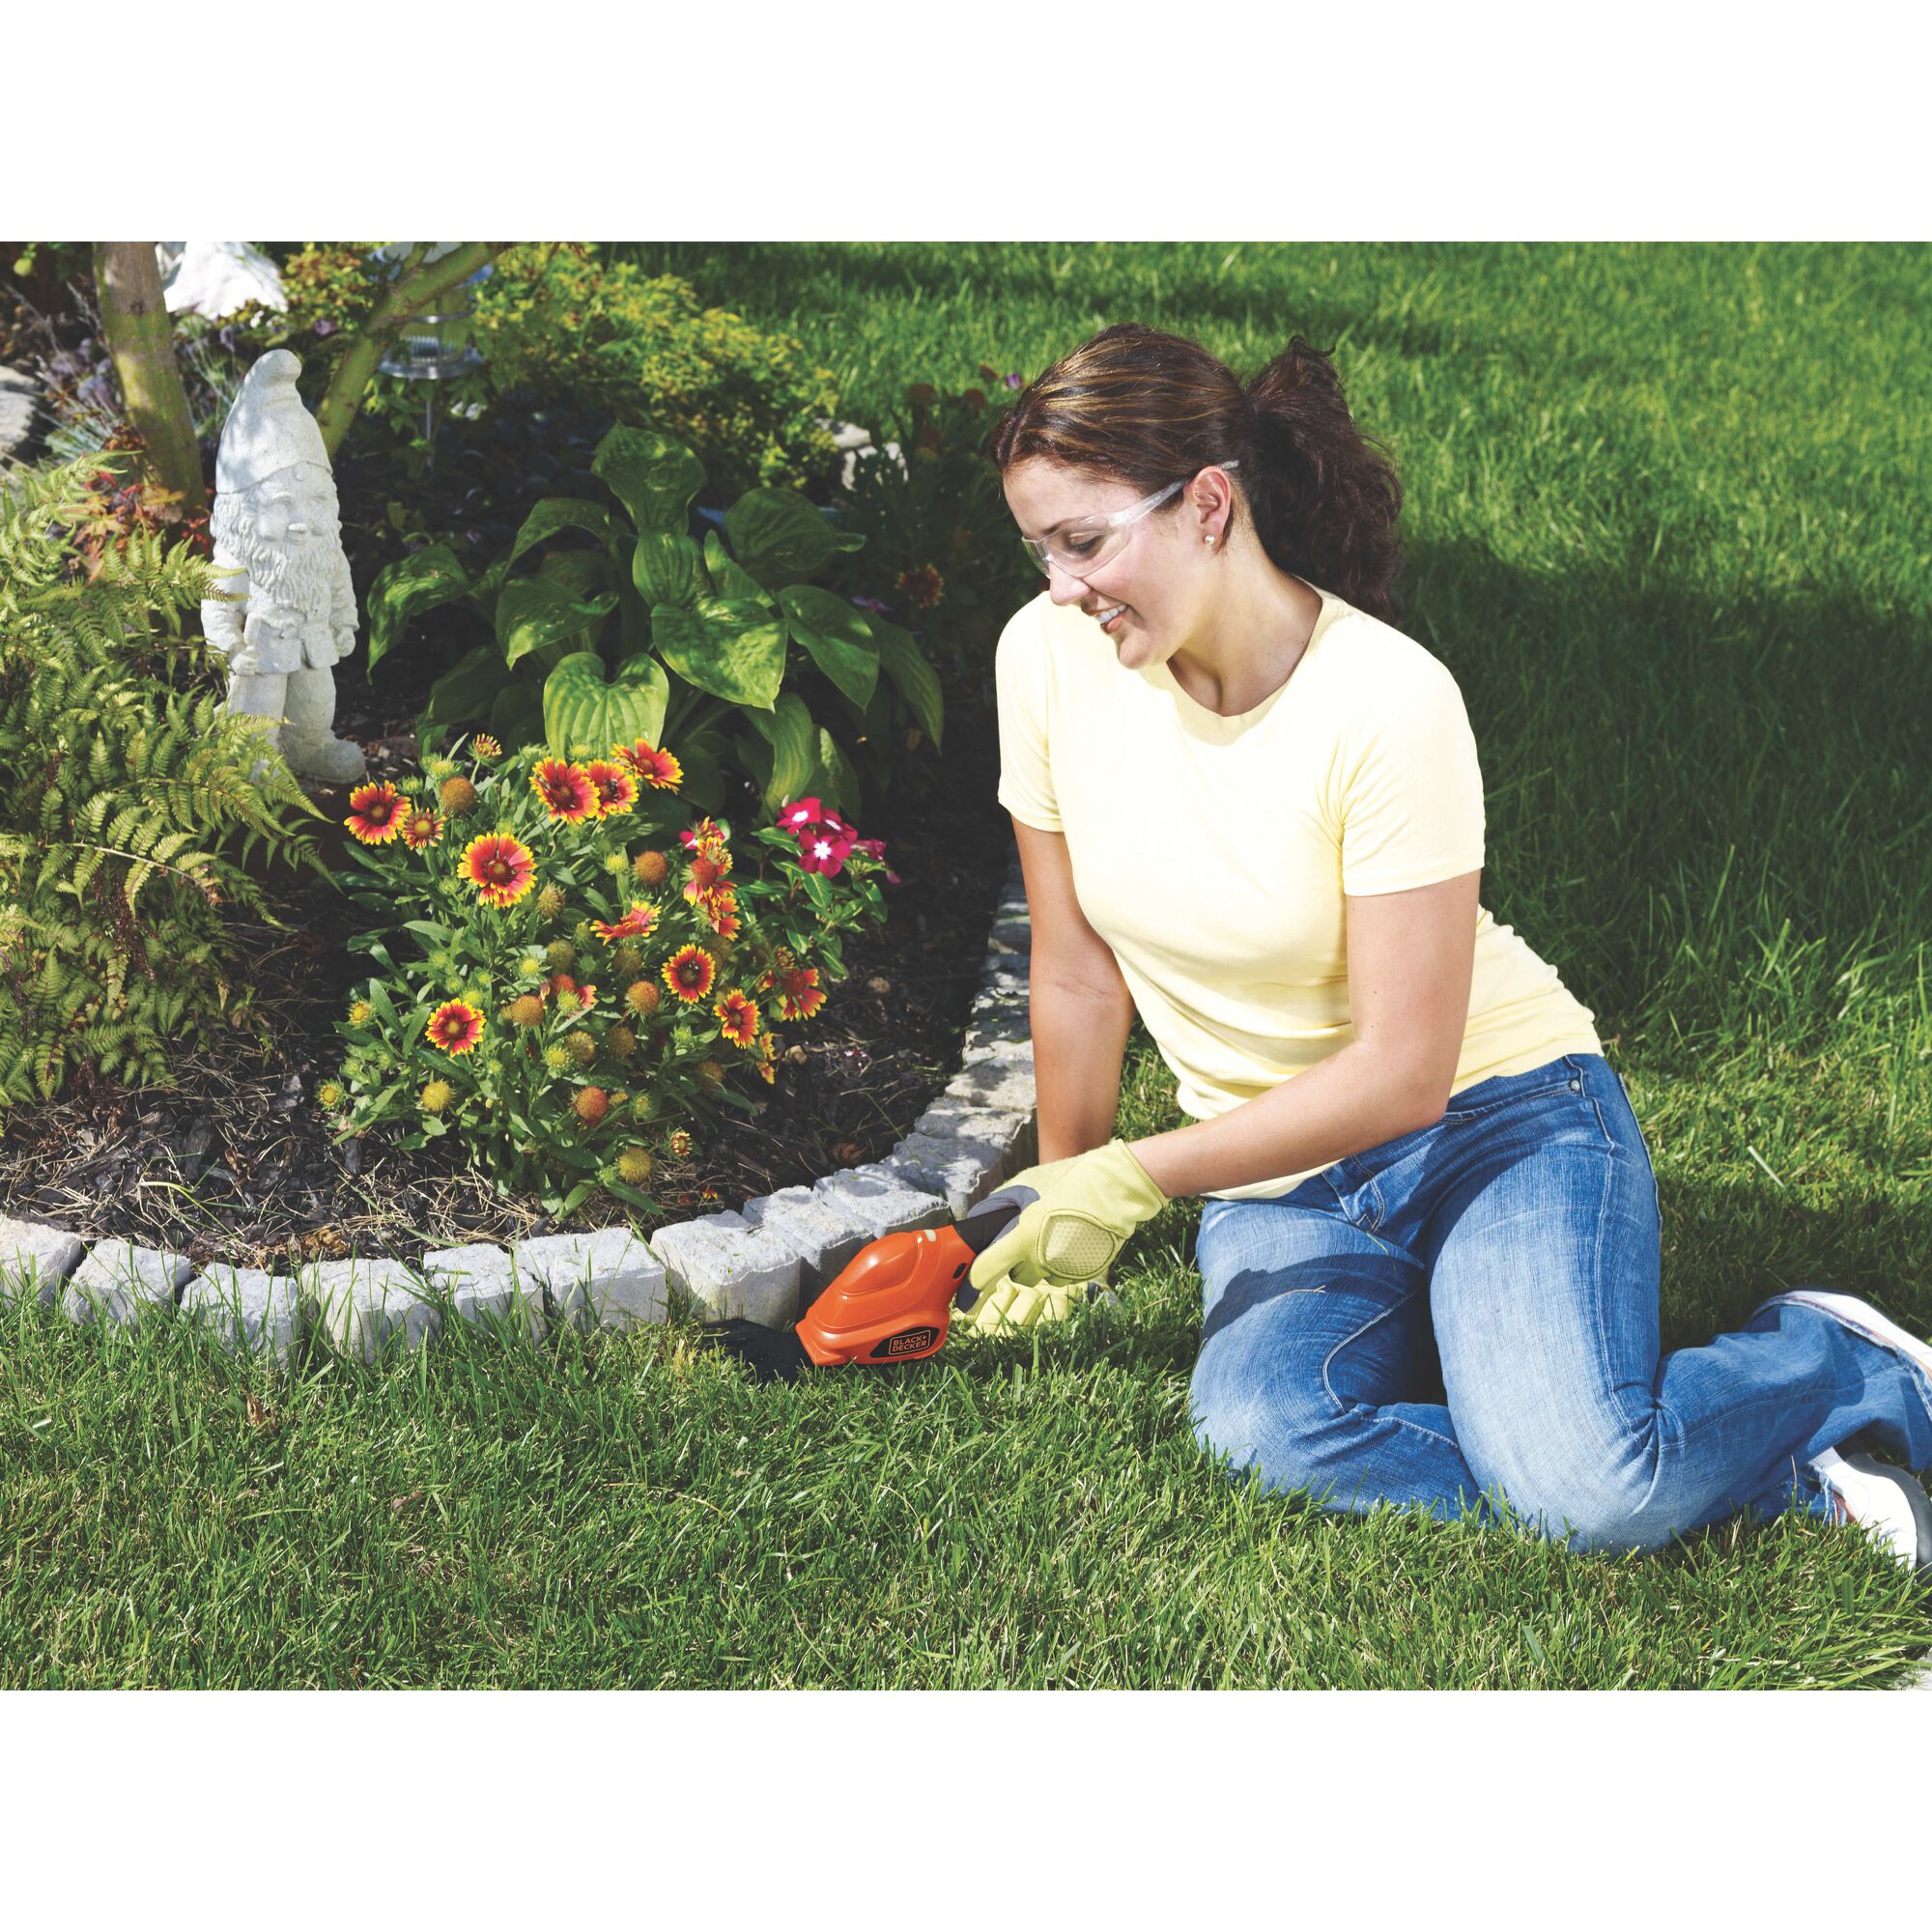 Lithium 2 in 1 Garden Shear Shrubber Combo being used by a person in a garden.